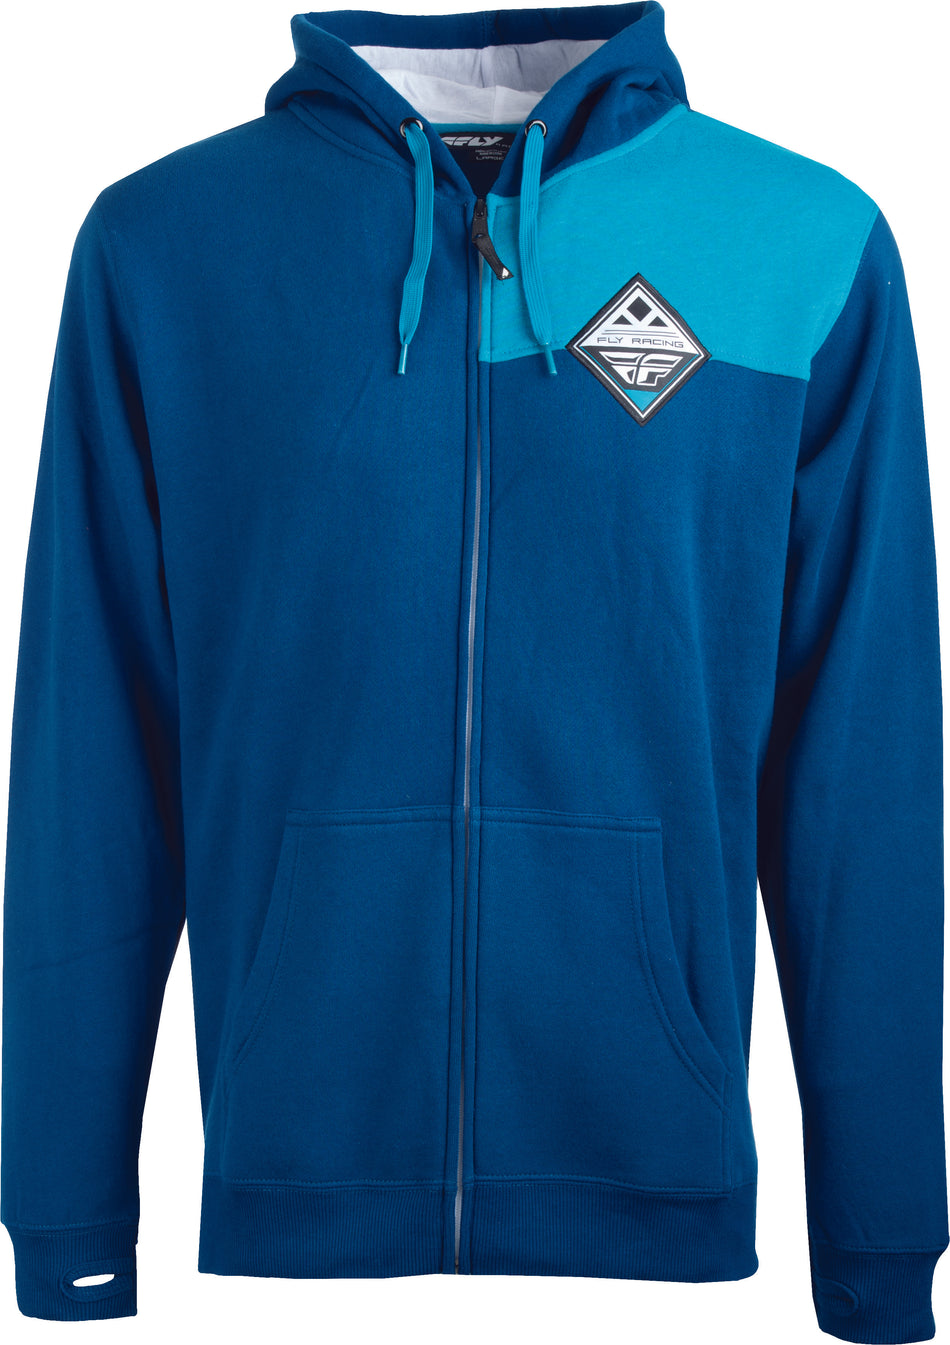 FLY RACING Fly Patch Hoodie Blue Lg Blue Lg 354-6281L